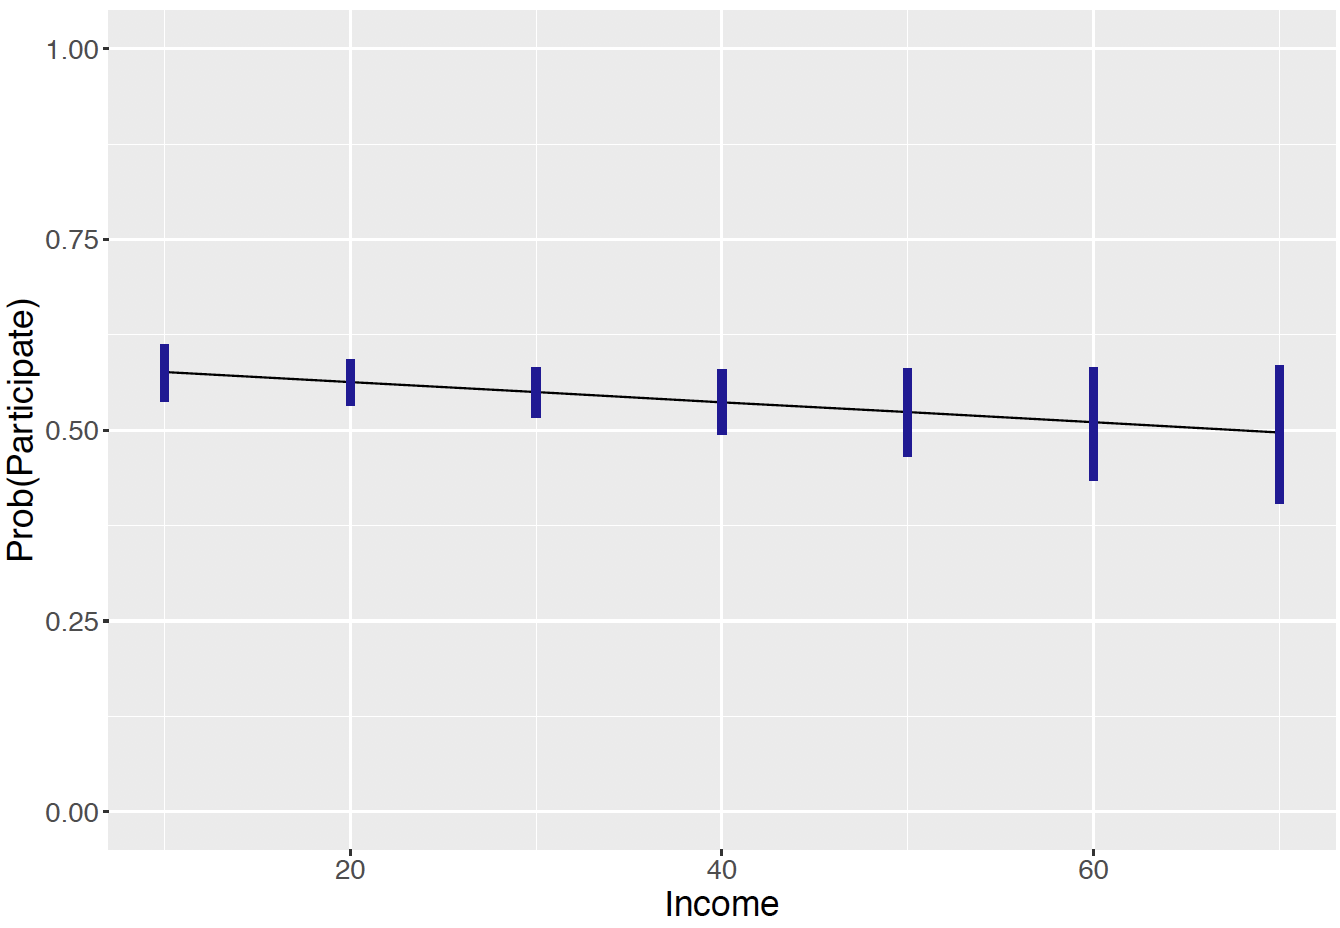 Posterior interval estimates for the probability of labor participation for seven values of the income variable.